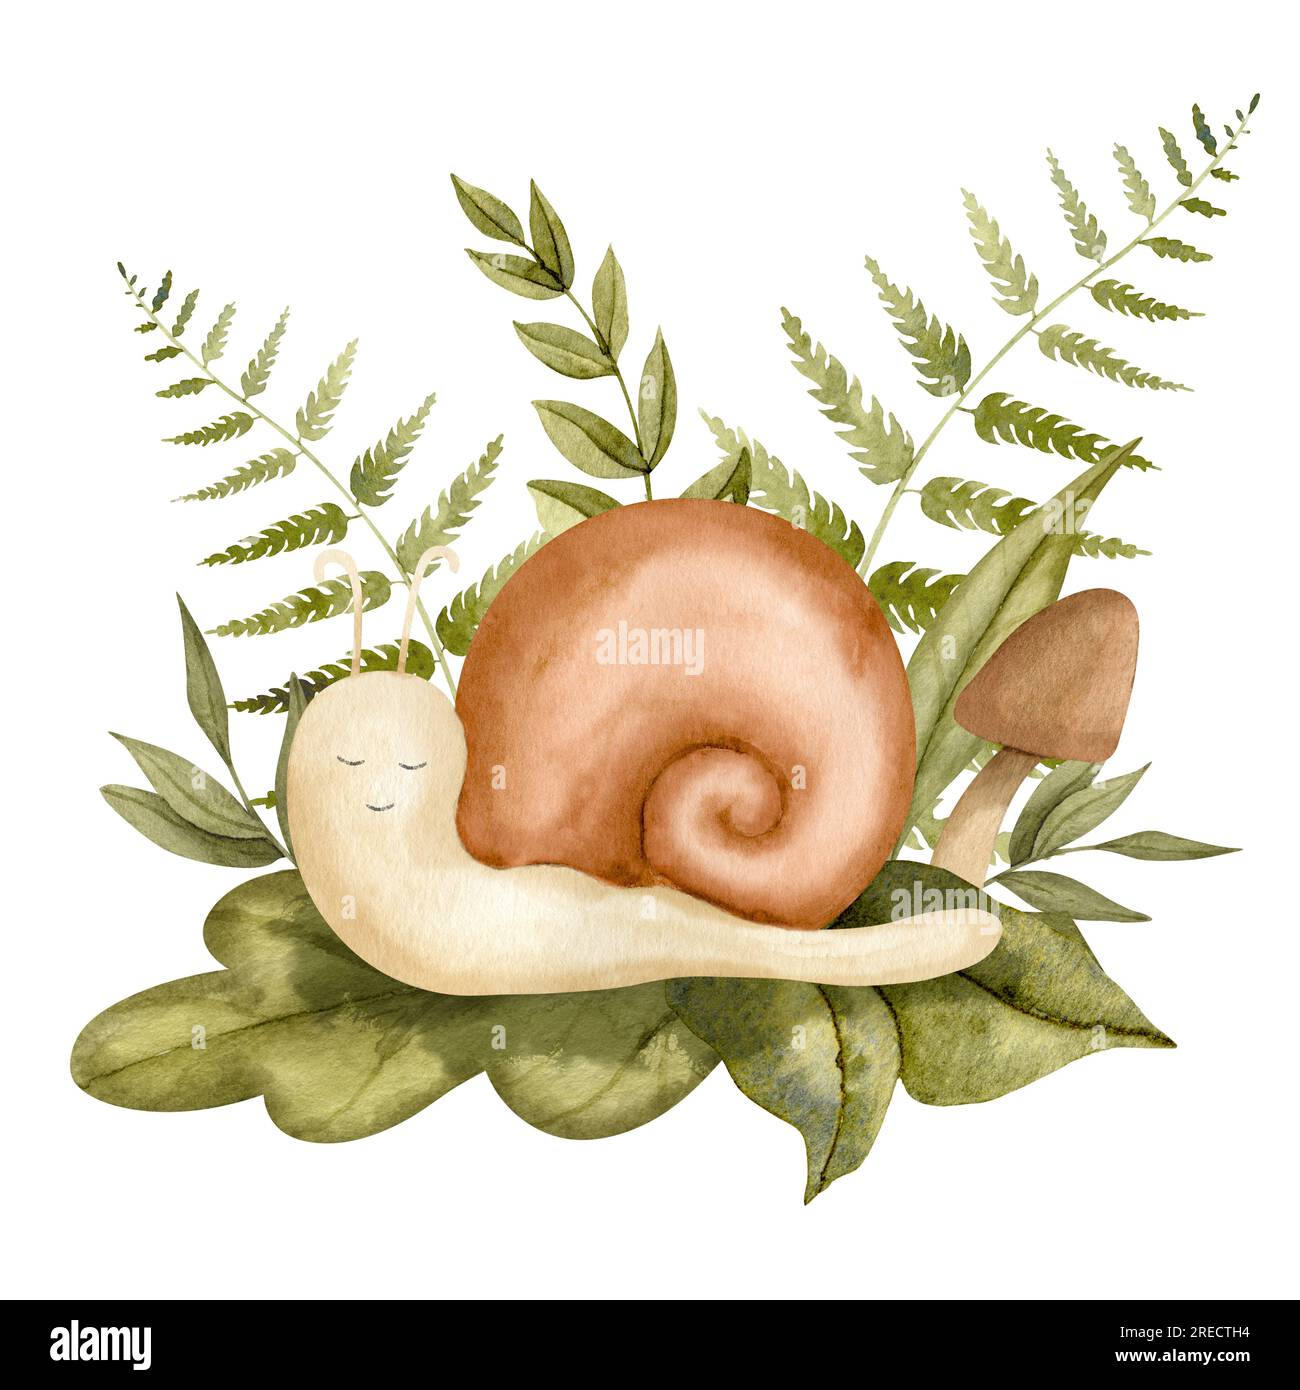 Snail with fern and forest plants. Hand drawn watercolor illustration of  cute cartoon character on white isolated background for baby shower  greeting cards or invitations. Sketch of spiral slug Stock Photo 